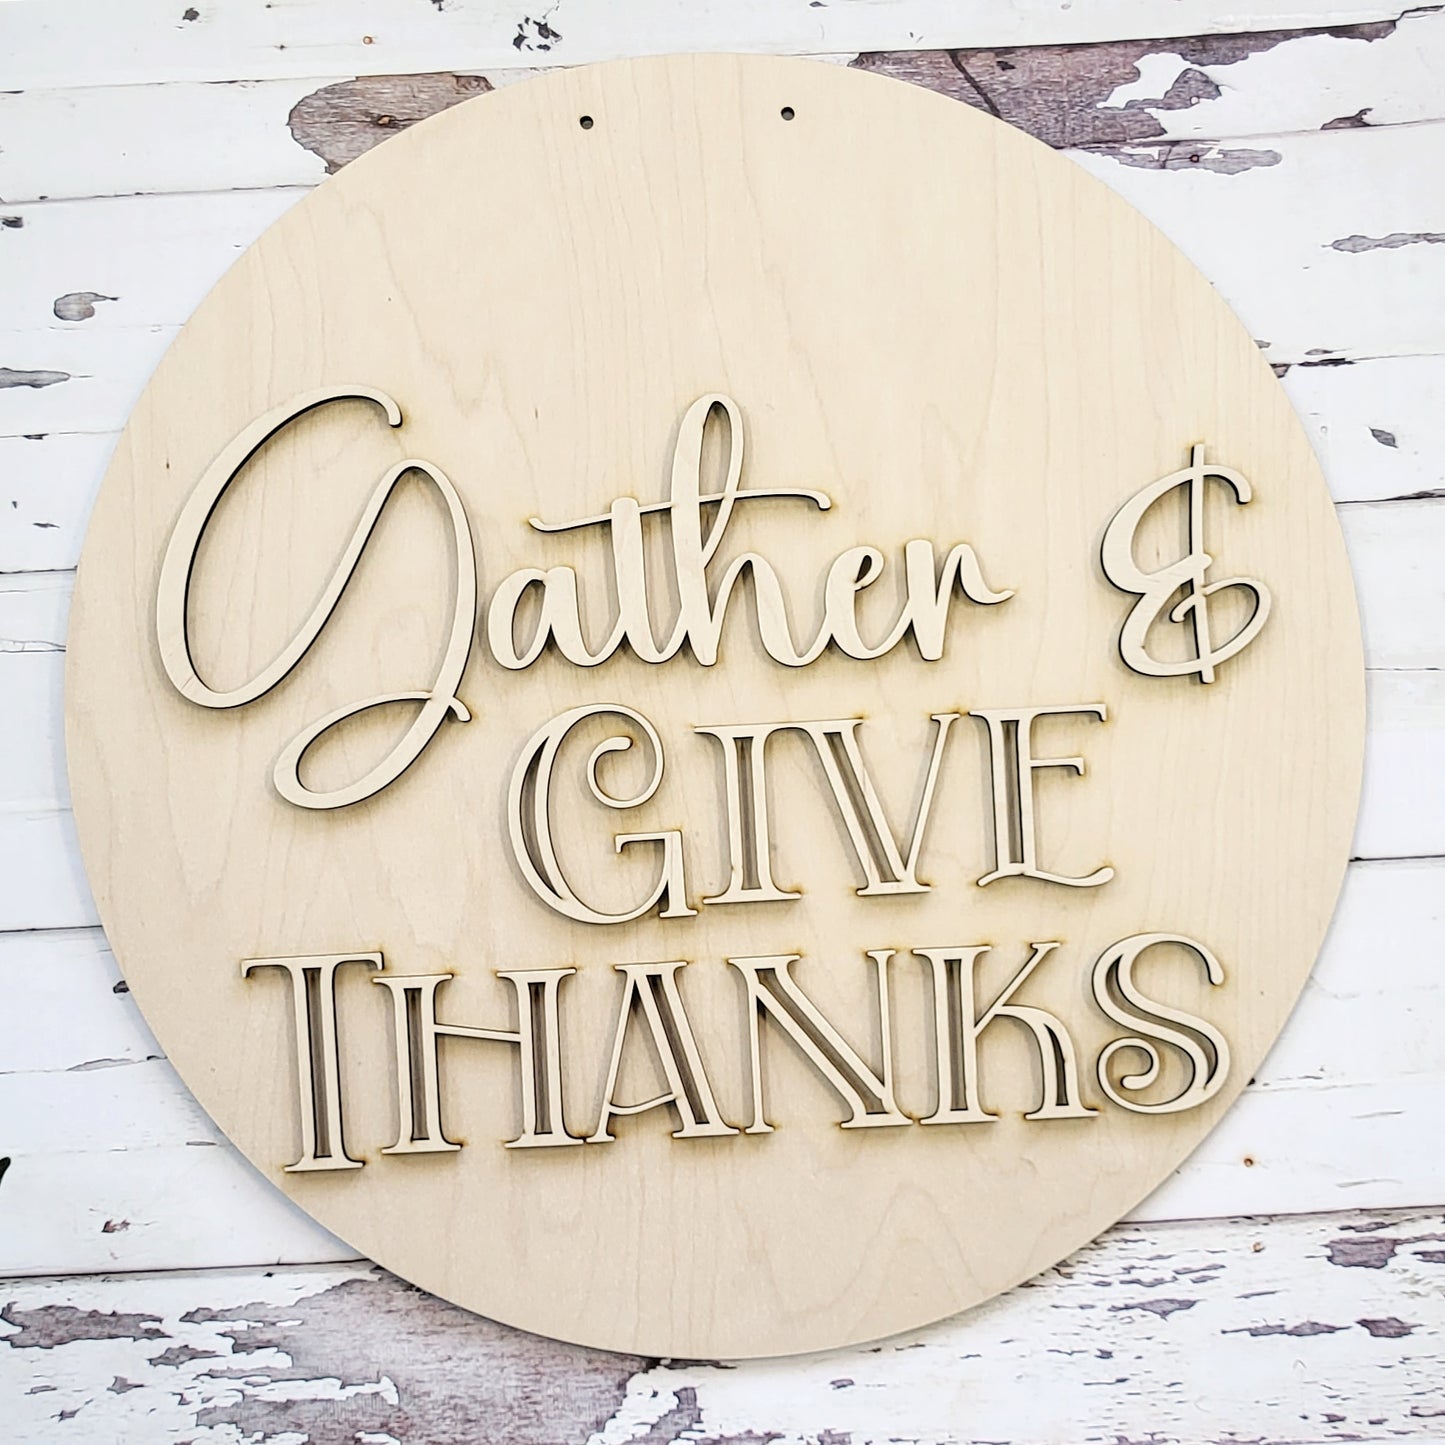 Gather & Give Thanks round wood sign